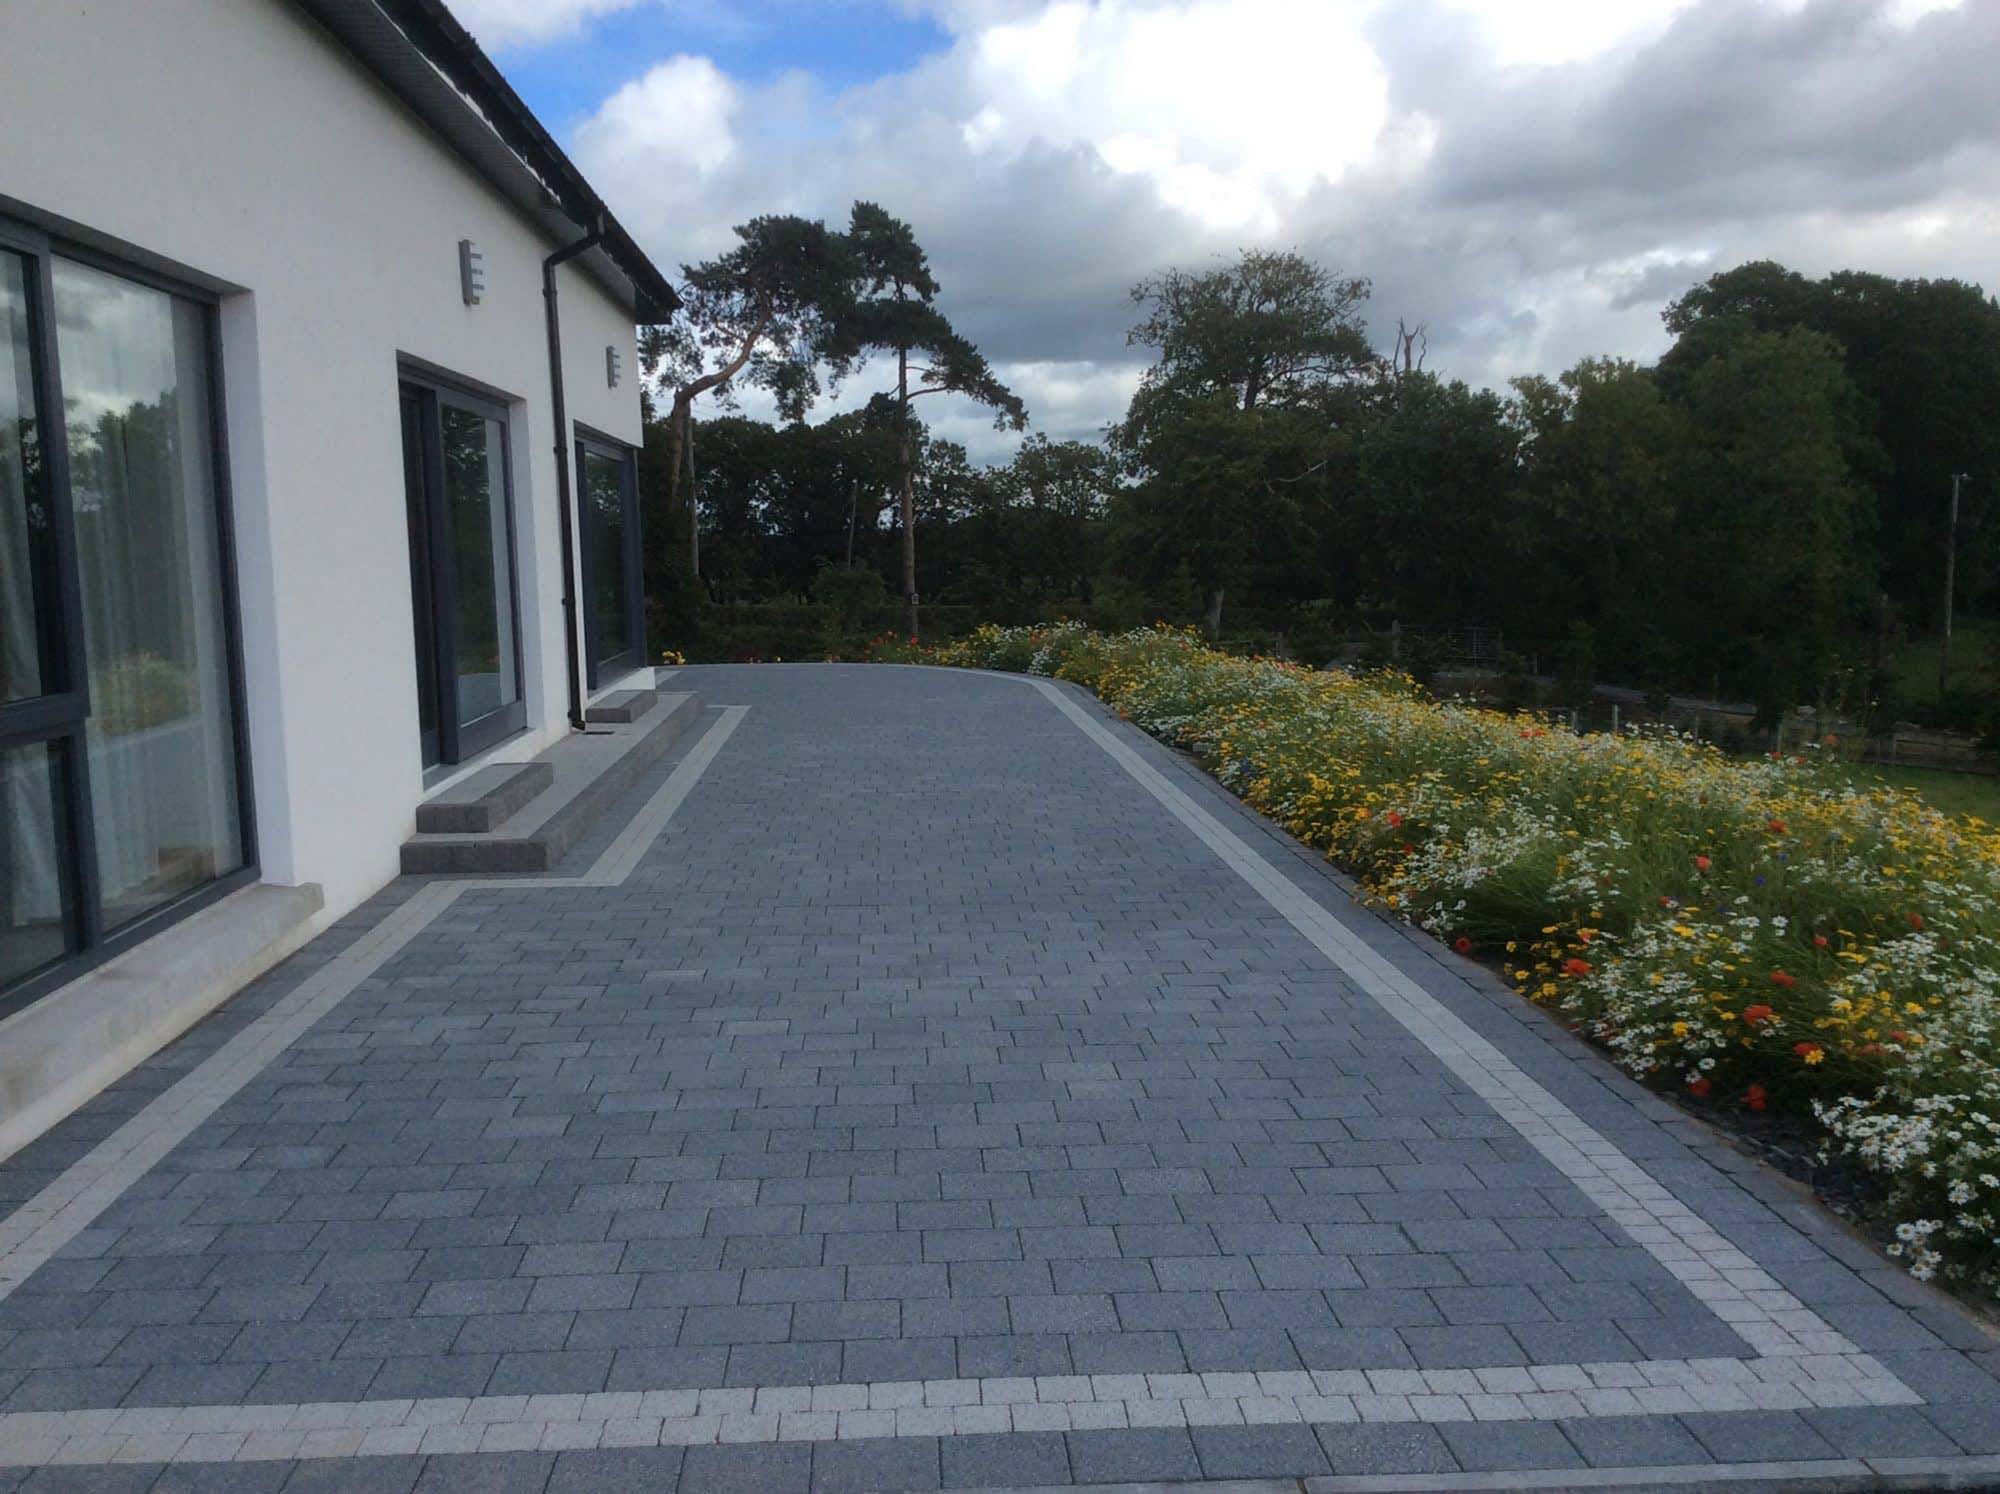 Newly paved driveway with decorative border